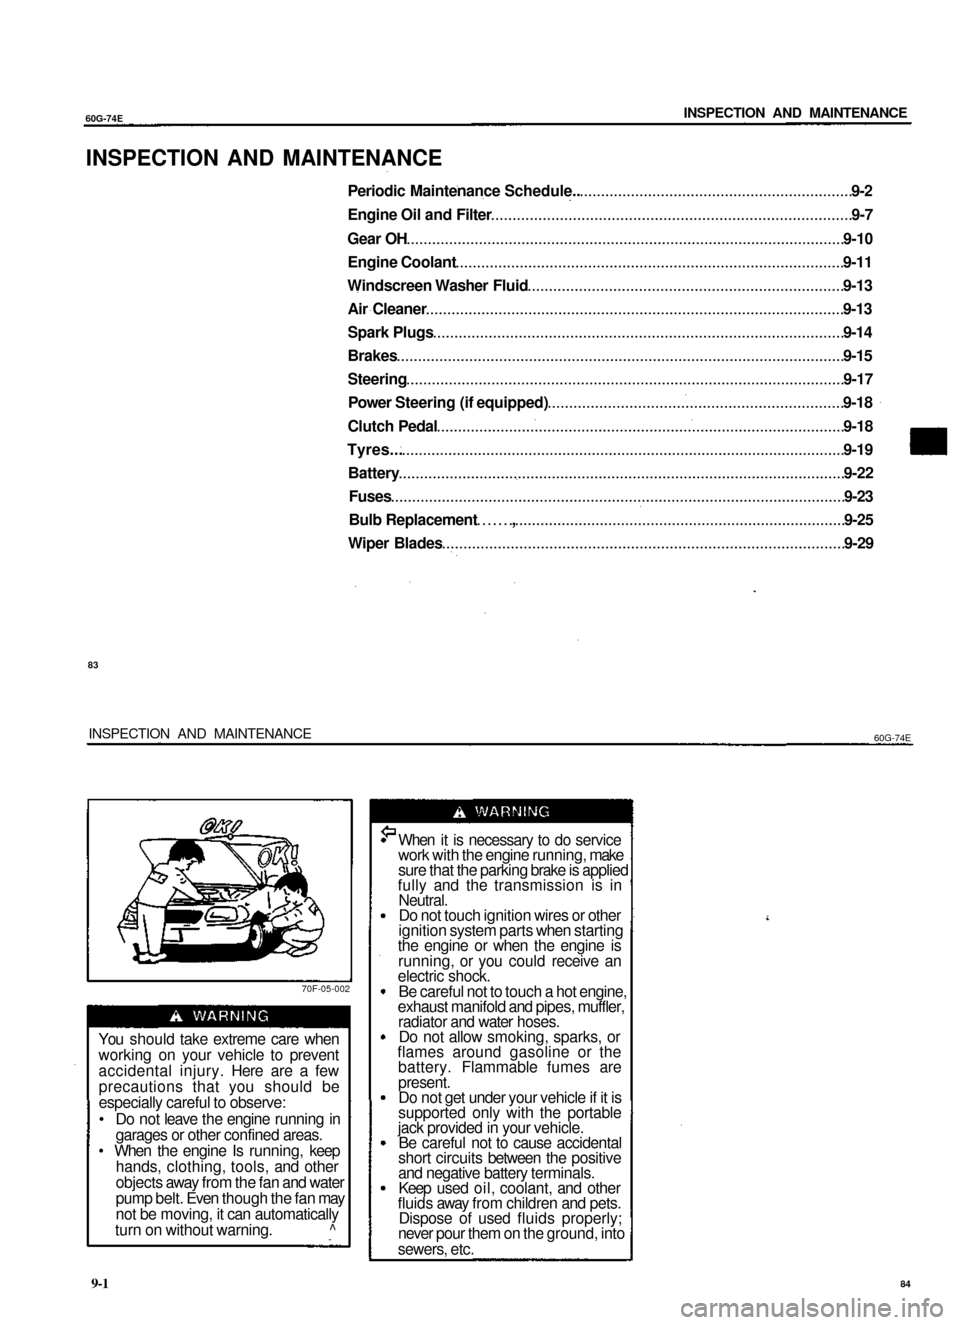 SUZUKI BALENO 1999 1.G Service Manual 
60G-74E 
INSPECTION AND MAINTENANCE

INSPECTION AND MAINTENANCE

Periodic Maintenance Schedule.. 9-2

Engine Oil and Filter 9-7

Gear OH 9-10

Engine Coolant 9-11

Windscreen Washer Fluid 9-13

Air C